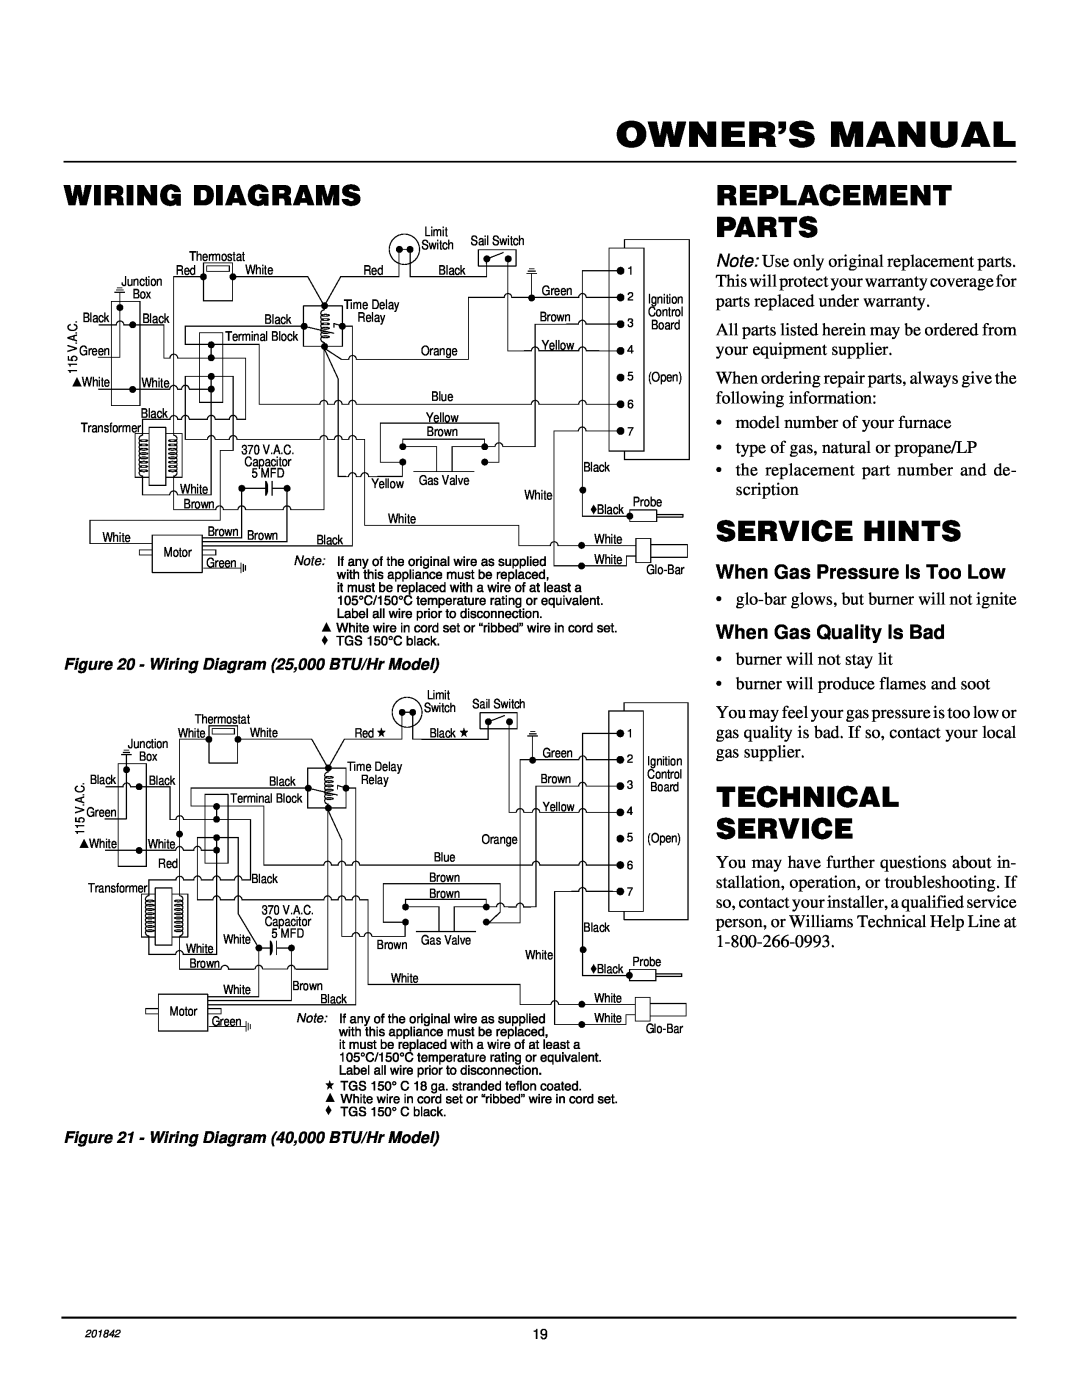 Williams 4003532, 2503532 Wiring Diagrams, Replacement, Parts, Service Hints, Technical Service, Owner’S Manual 